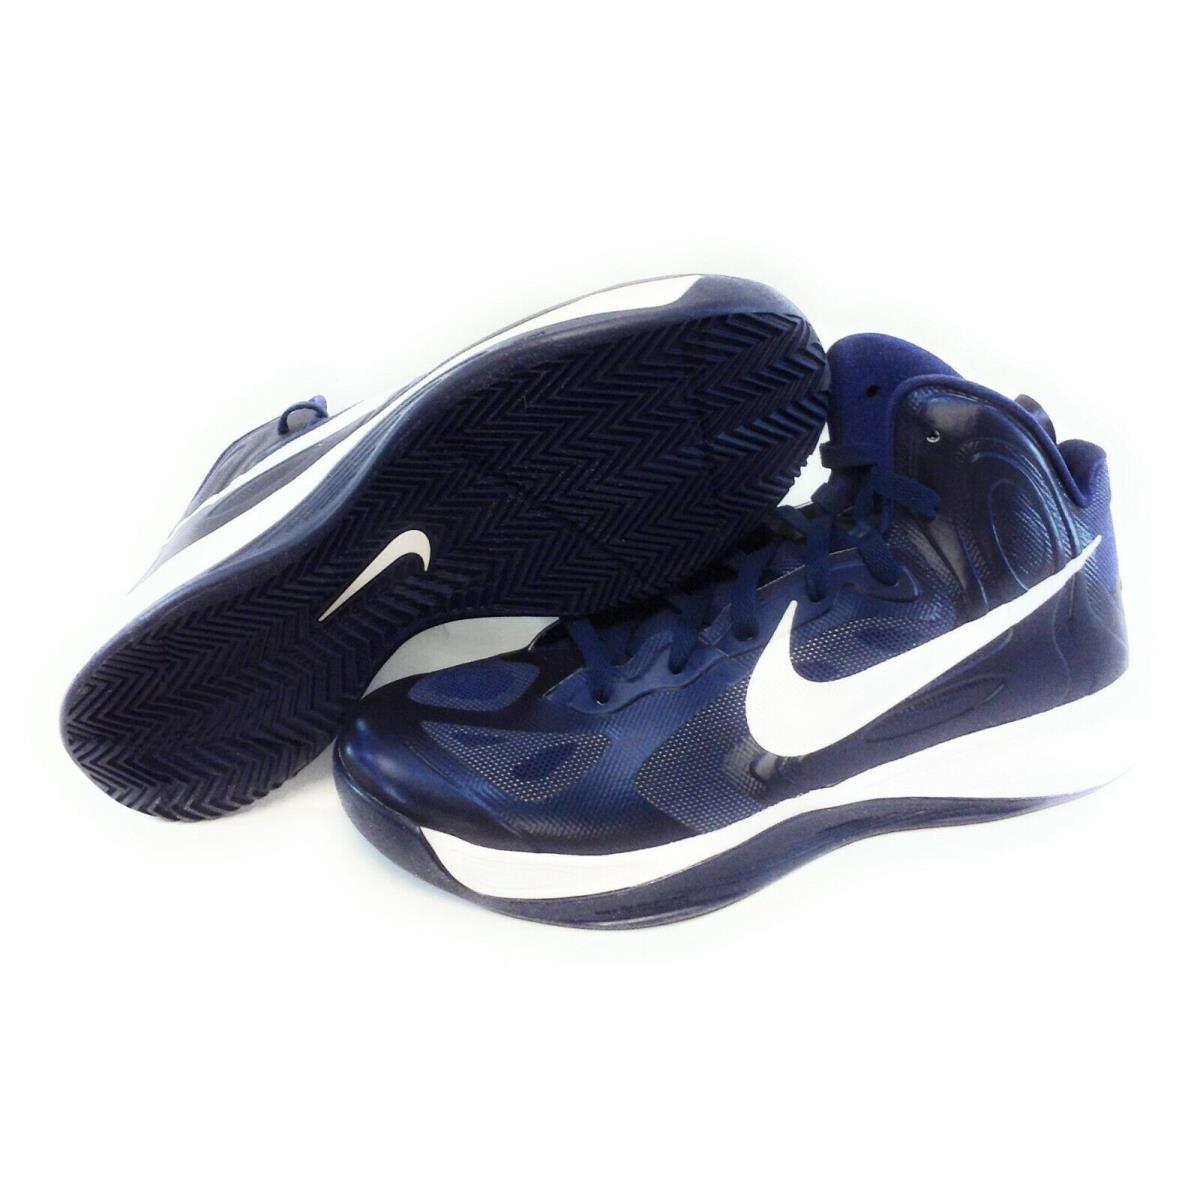 Mens Nike Hyperfuse TB 525019 401 Blue White Basketball 2012 DS Sneakers Shoes - Blue, Manufacturer: Midnight Navy Blue